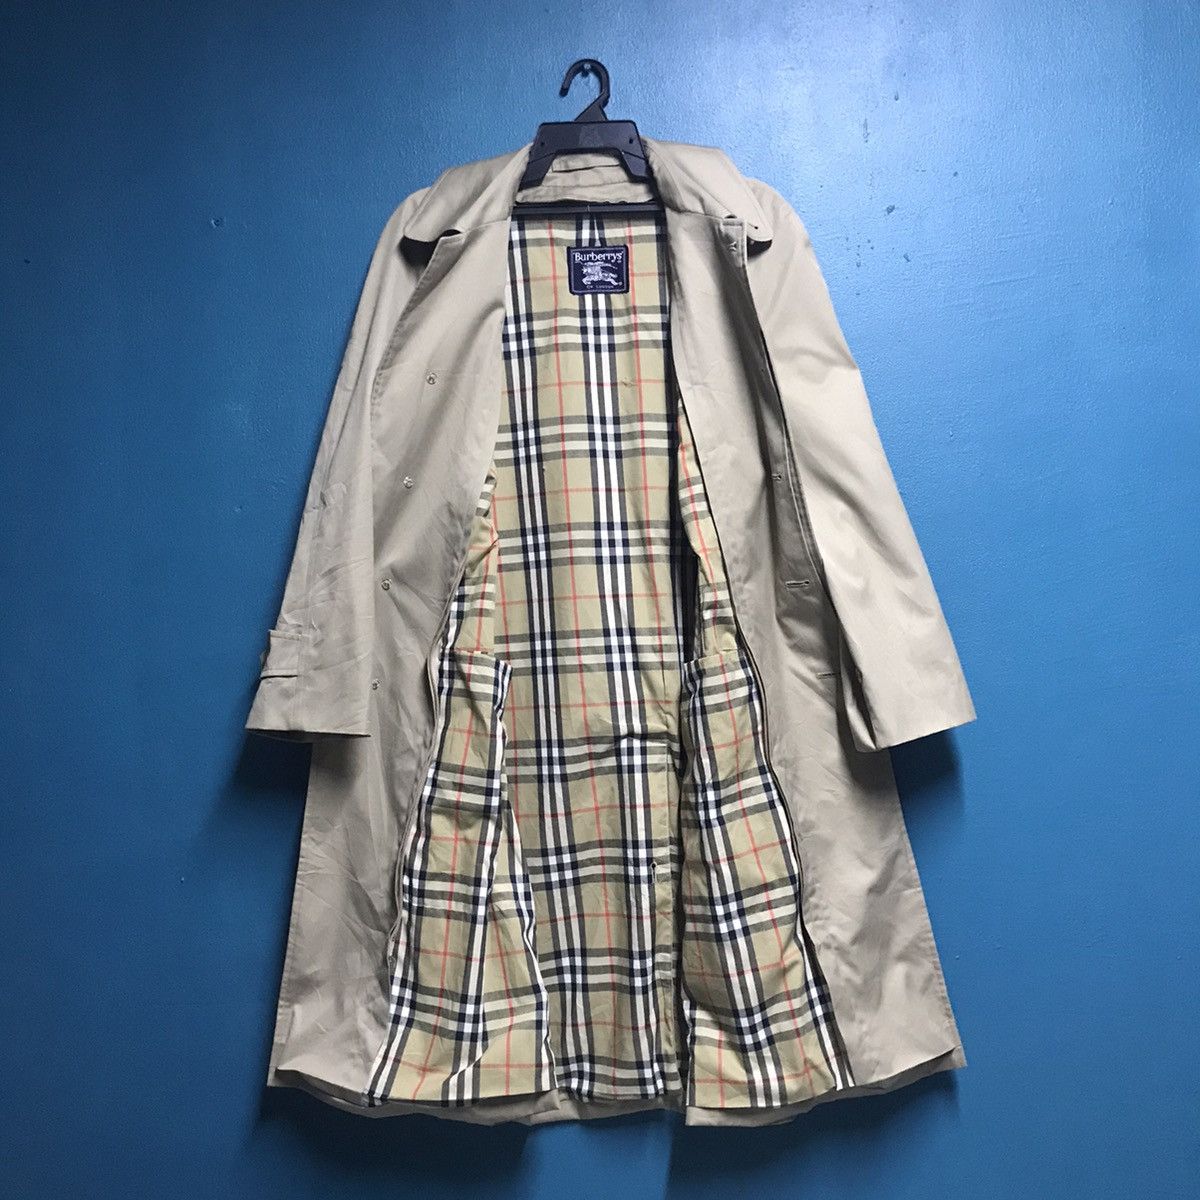 Burberry Prorsum Vintage burberry nova check trench coat with wool lining Size US L / EU 52-54 / 3 - 3 Thumbnail